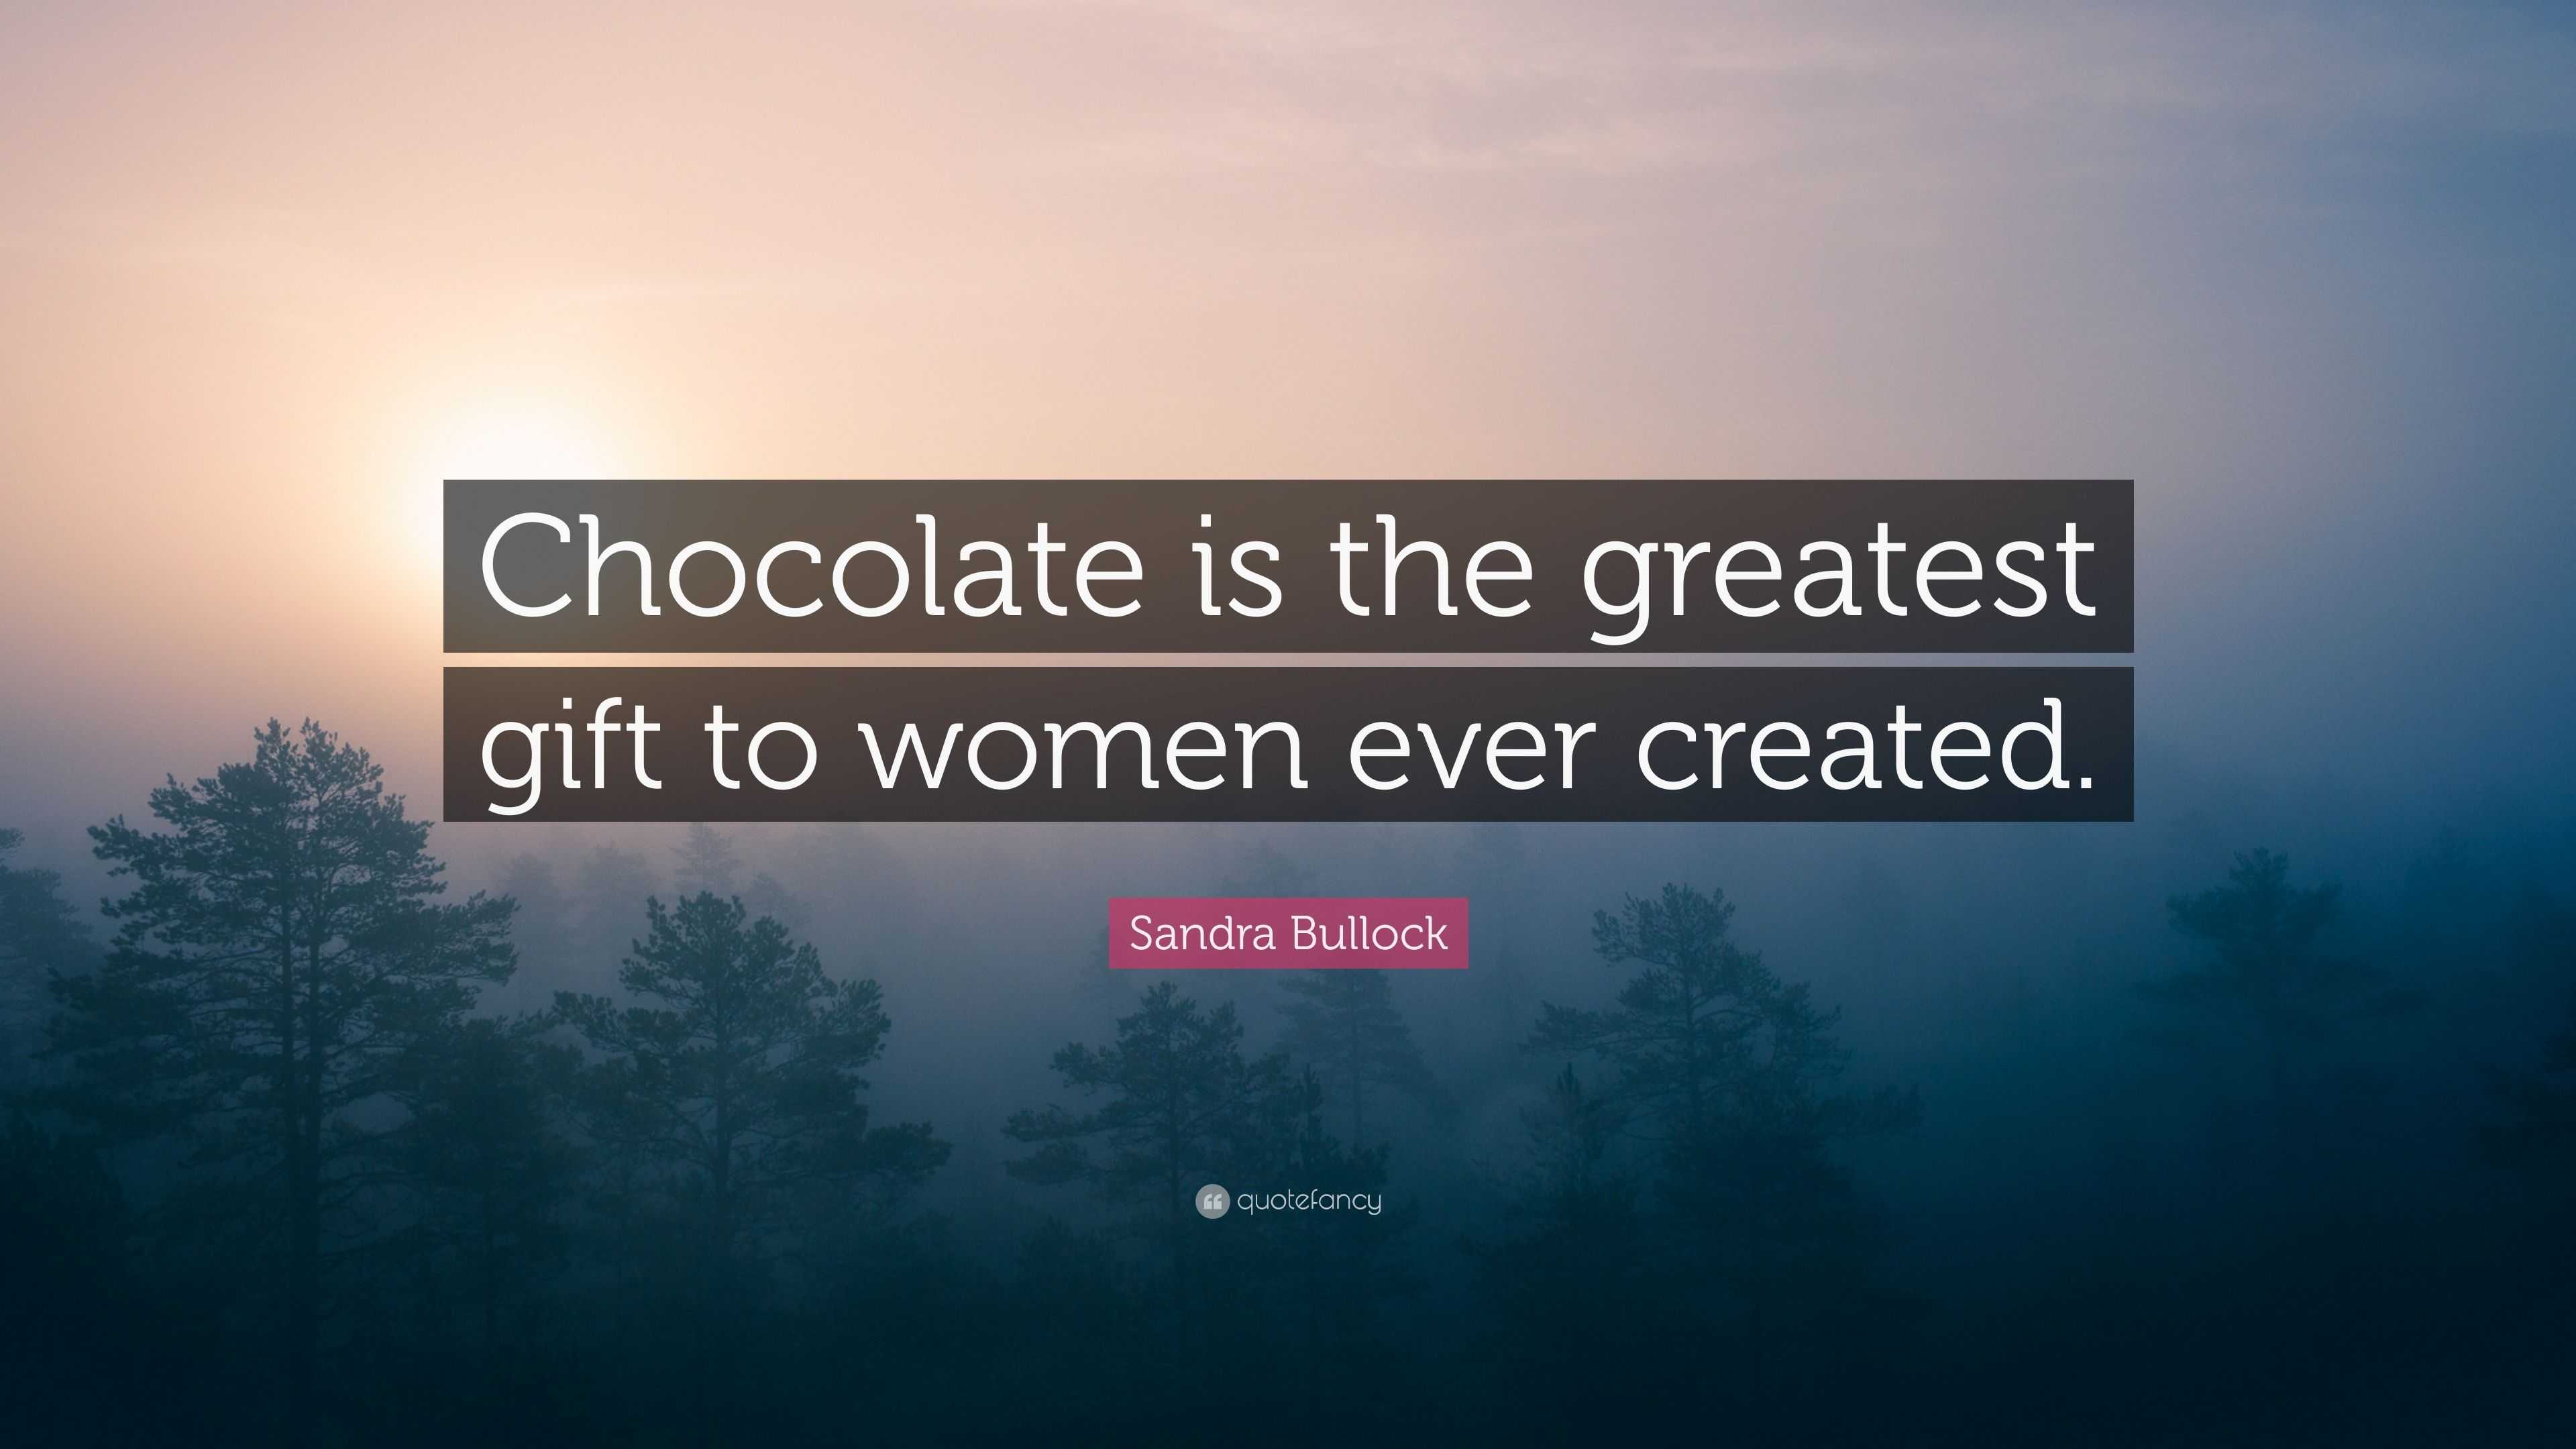 Sandra Bullock Quote: “Chocolate is the greatest gift to women ever  created, next to the likes of Paul Newman and Gene Kelly. It's something  th...”